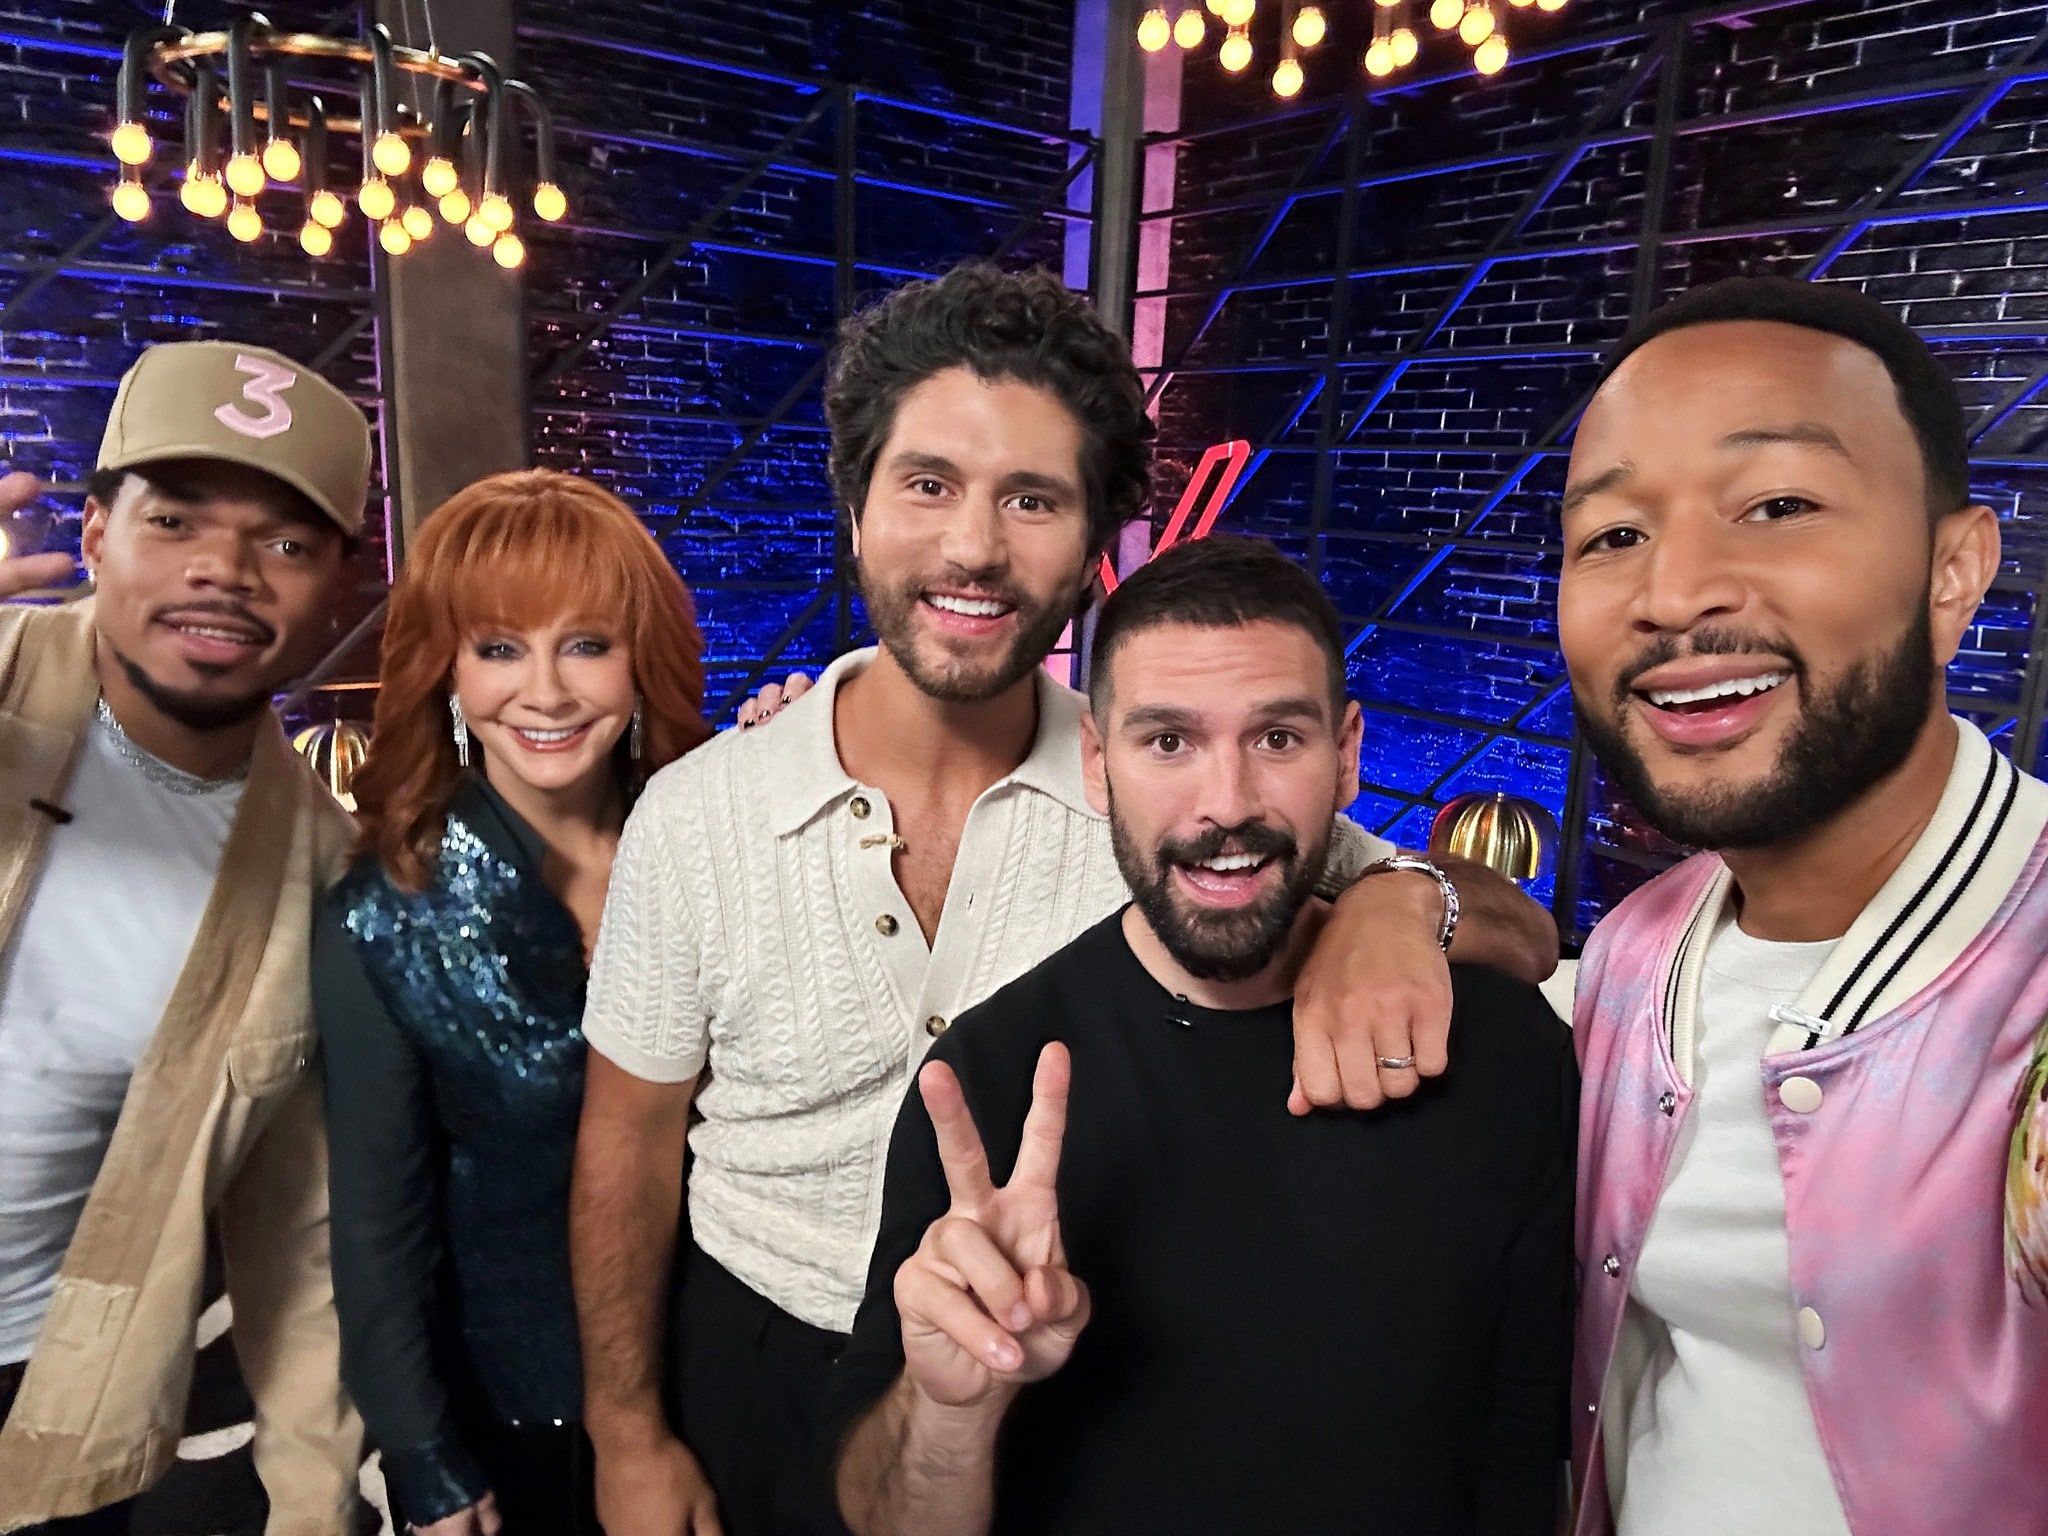 Reba McEntire was forced to address false reports she's leaving The Voice. Here, she's pictured with the other coaches for Season 25, Chance the Rapper, Dan + Shay, and John Legend.